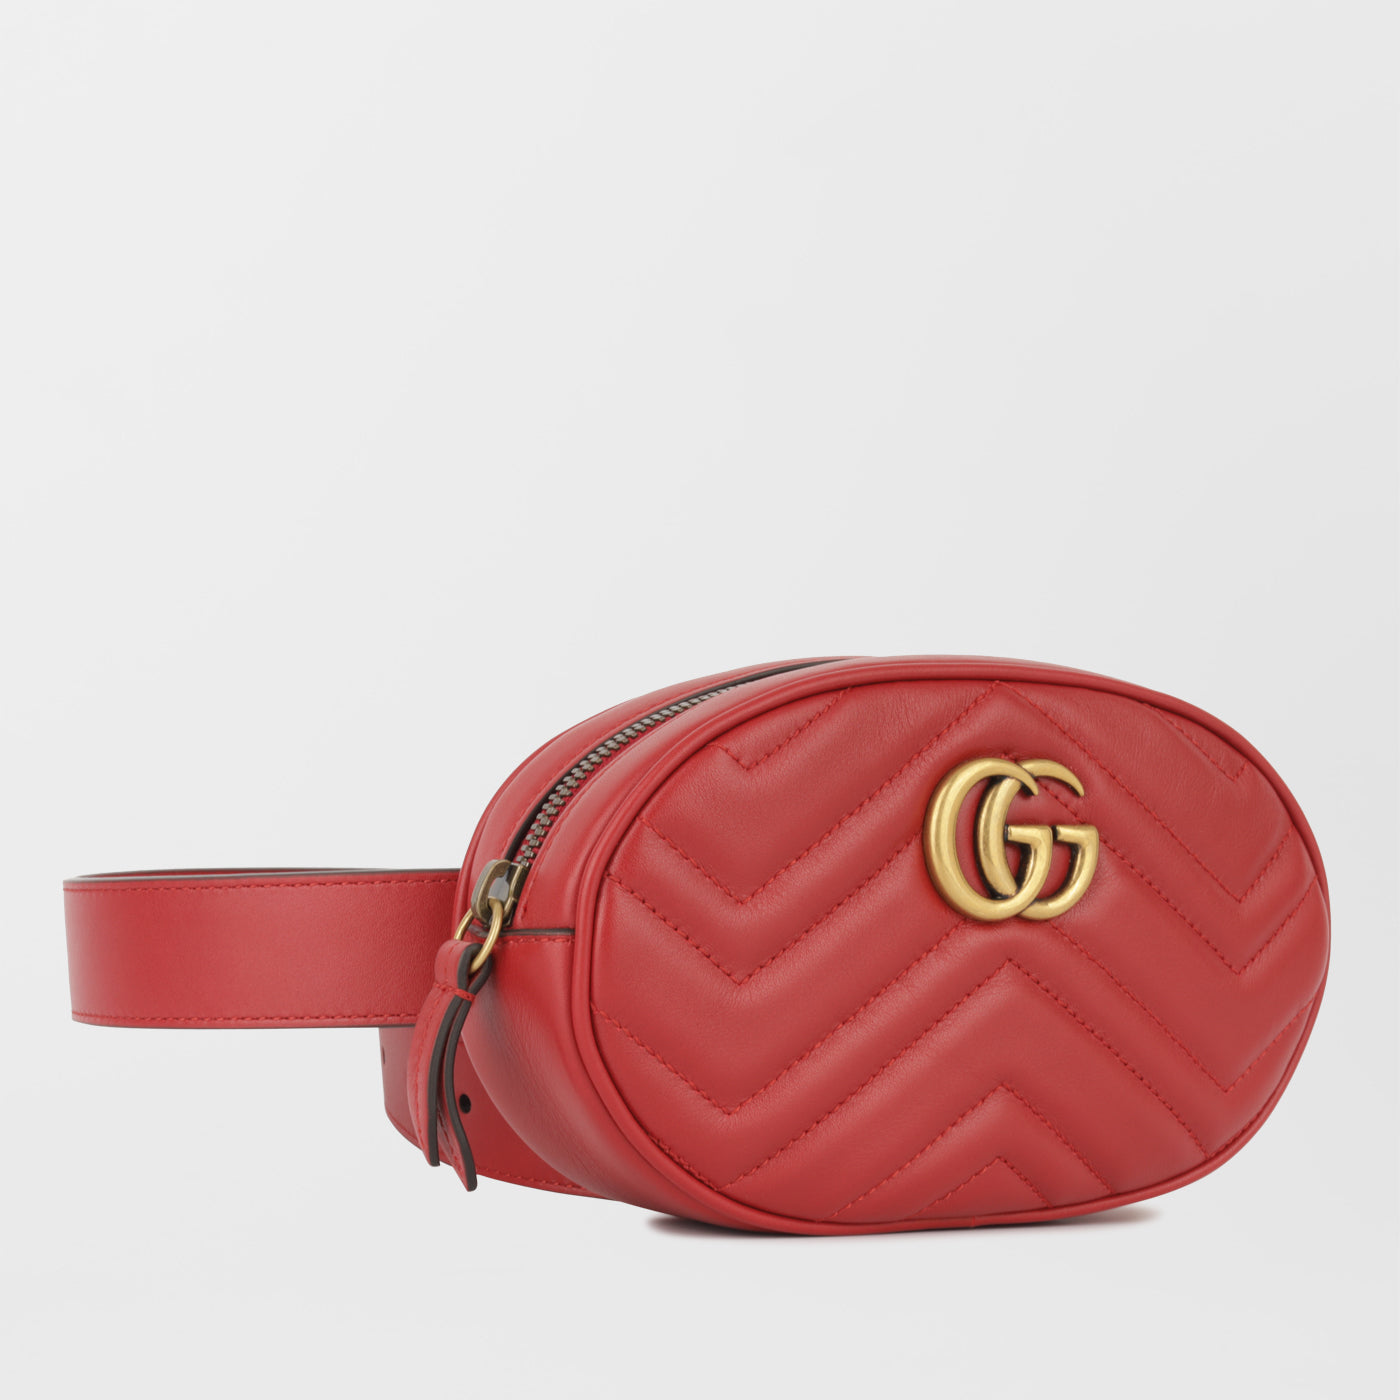 Gucci Red Fanny Pack